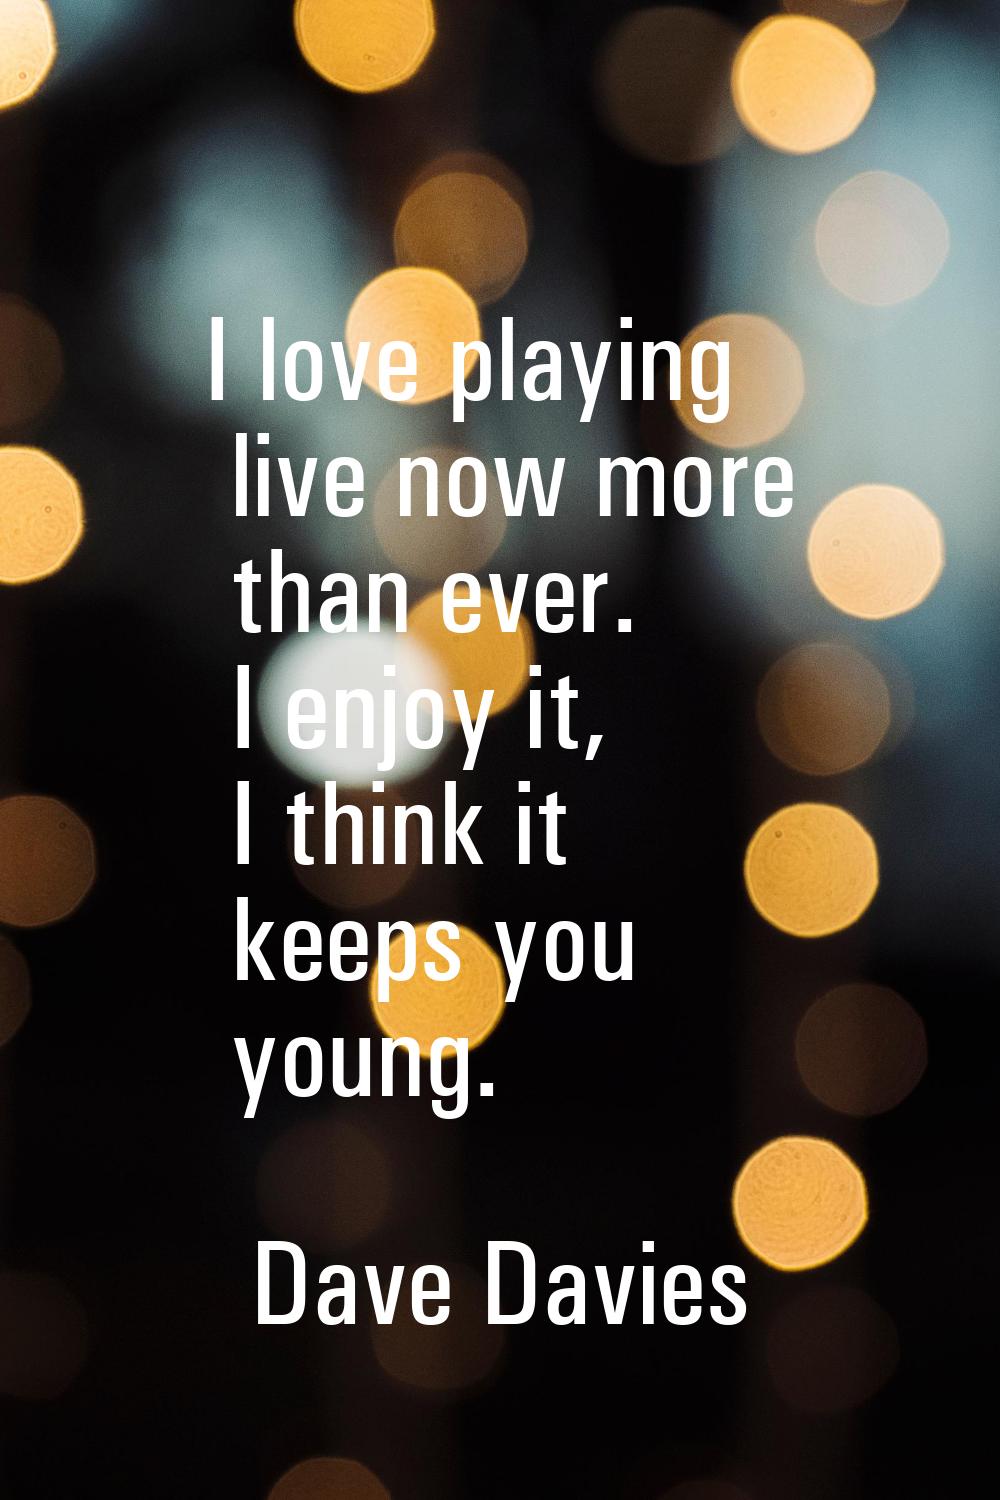 I love playing live now more than ever. I enjoy it, I think it keeps you young.